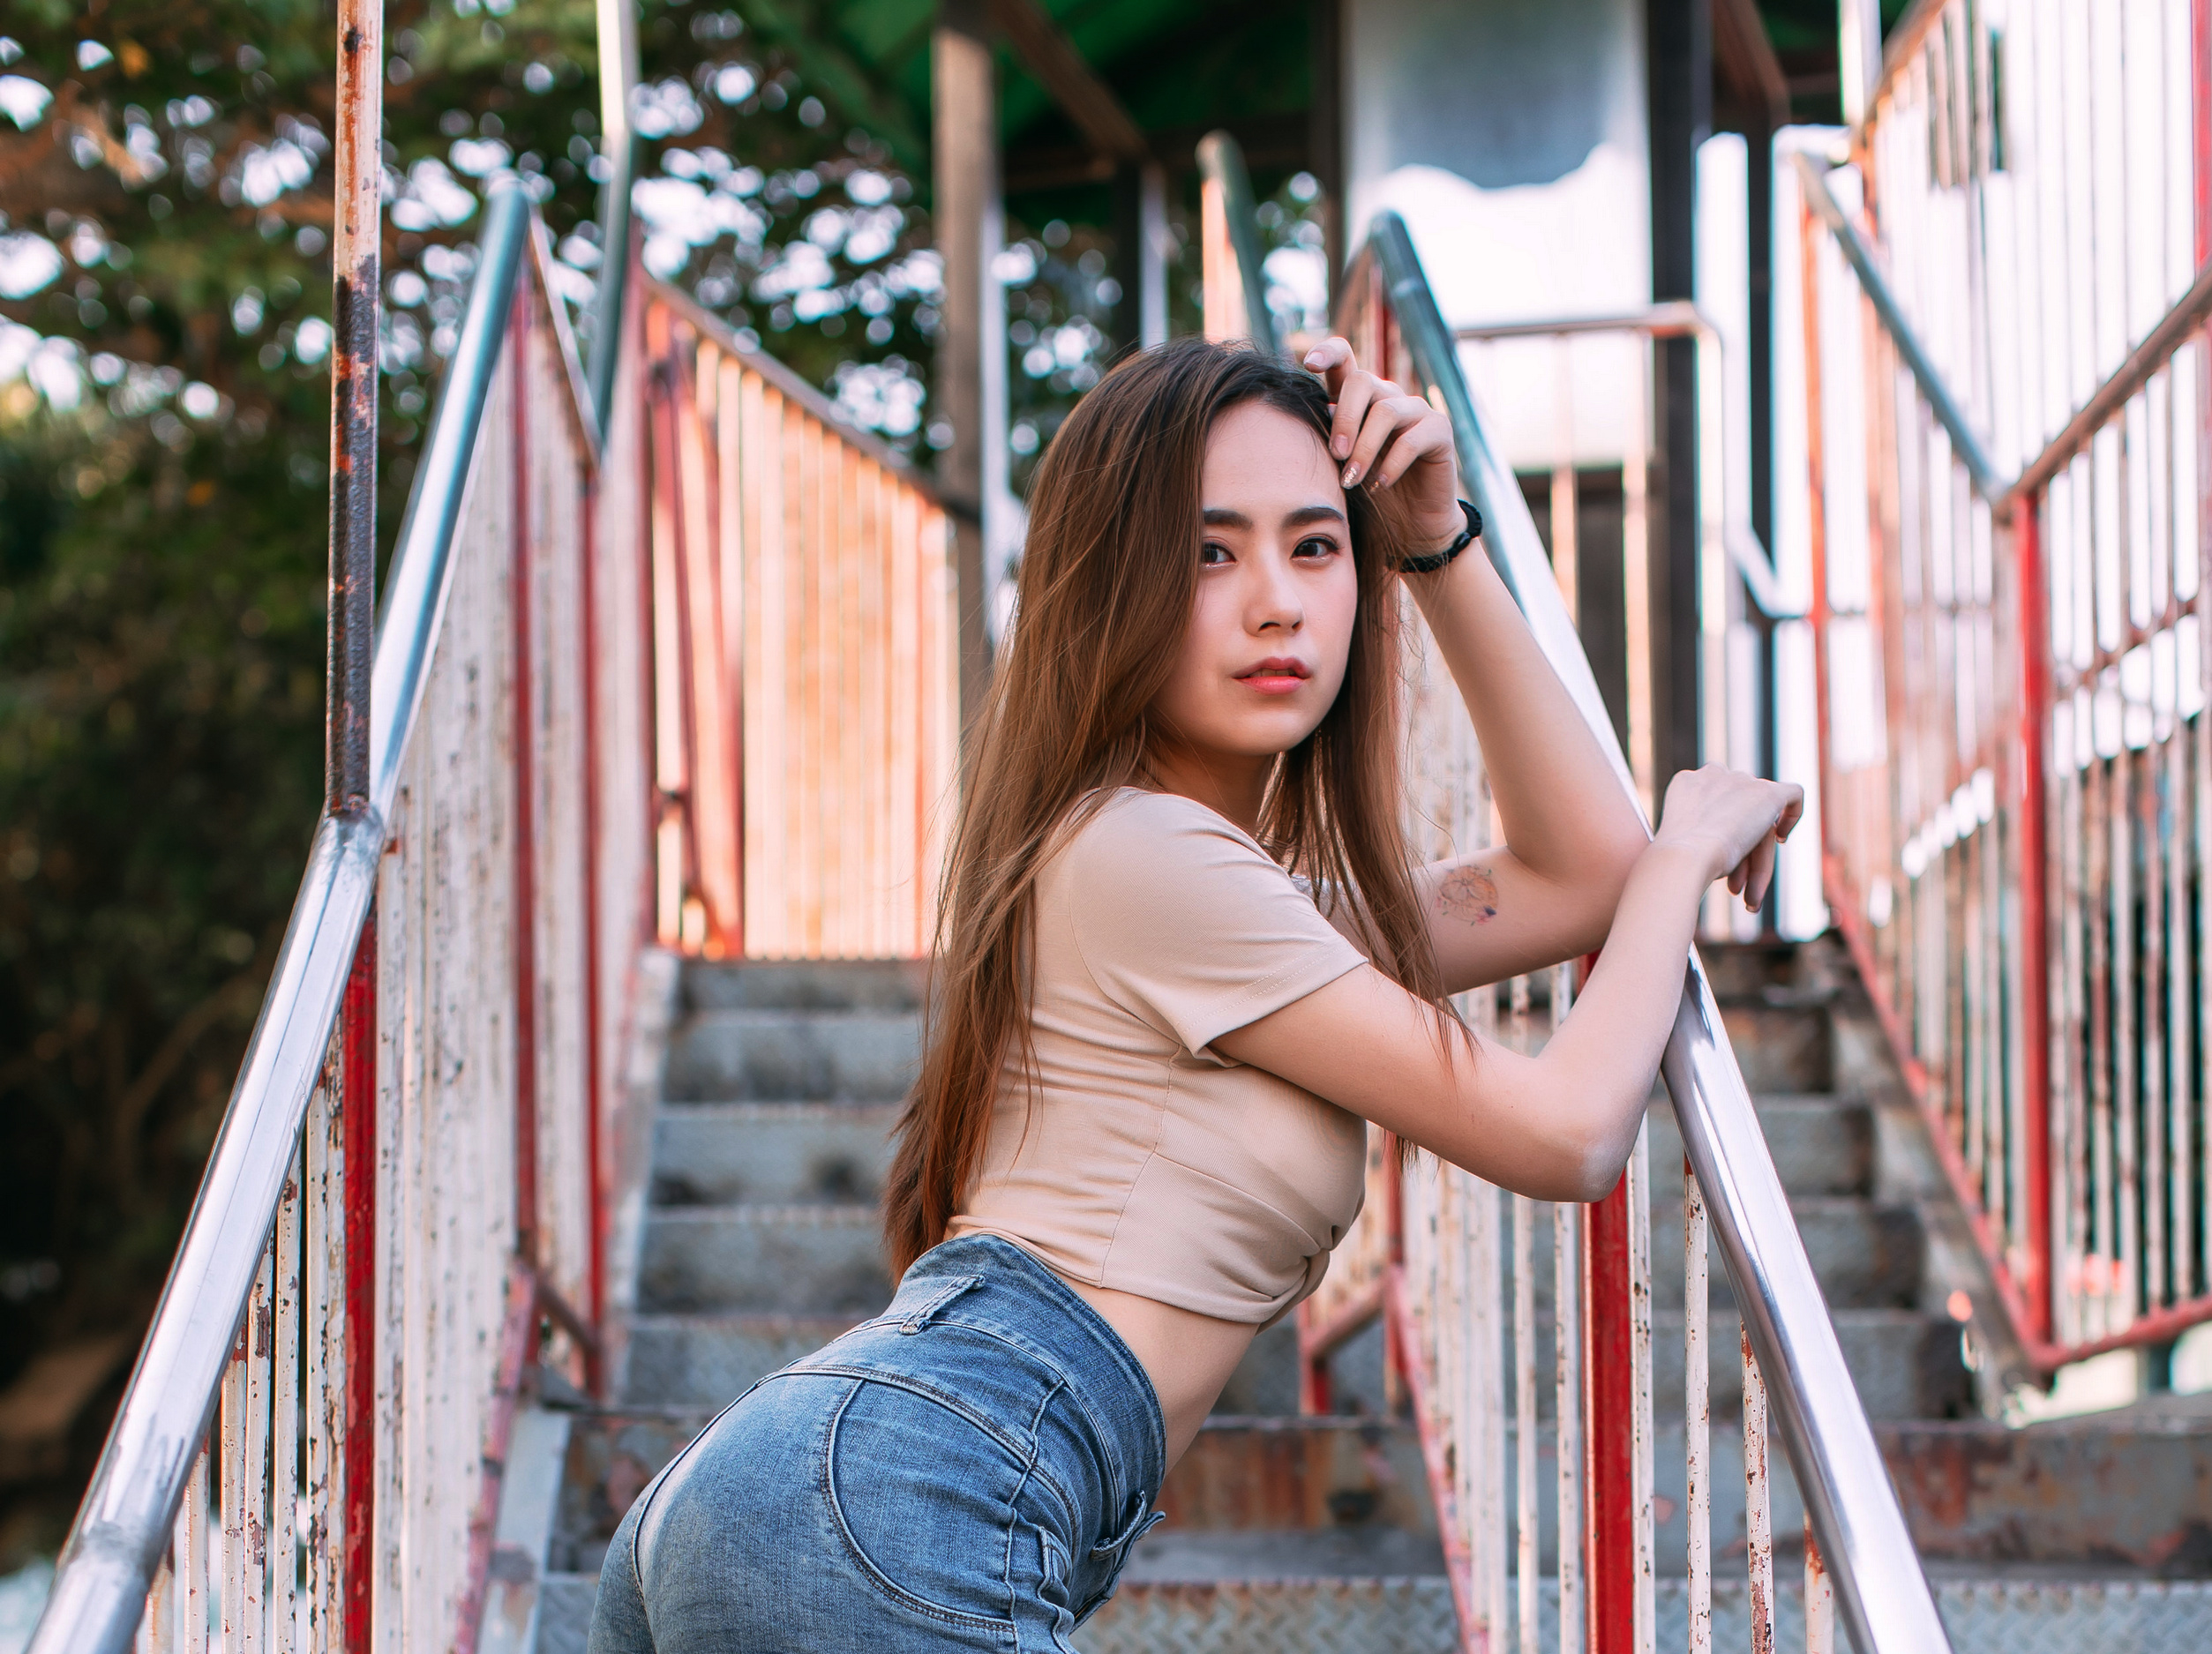 People 2507x1875 Asian model women long hair brunette stairs railing leaning jeans short tops tattoo depth of field trees bracelets passage looking at viewer